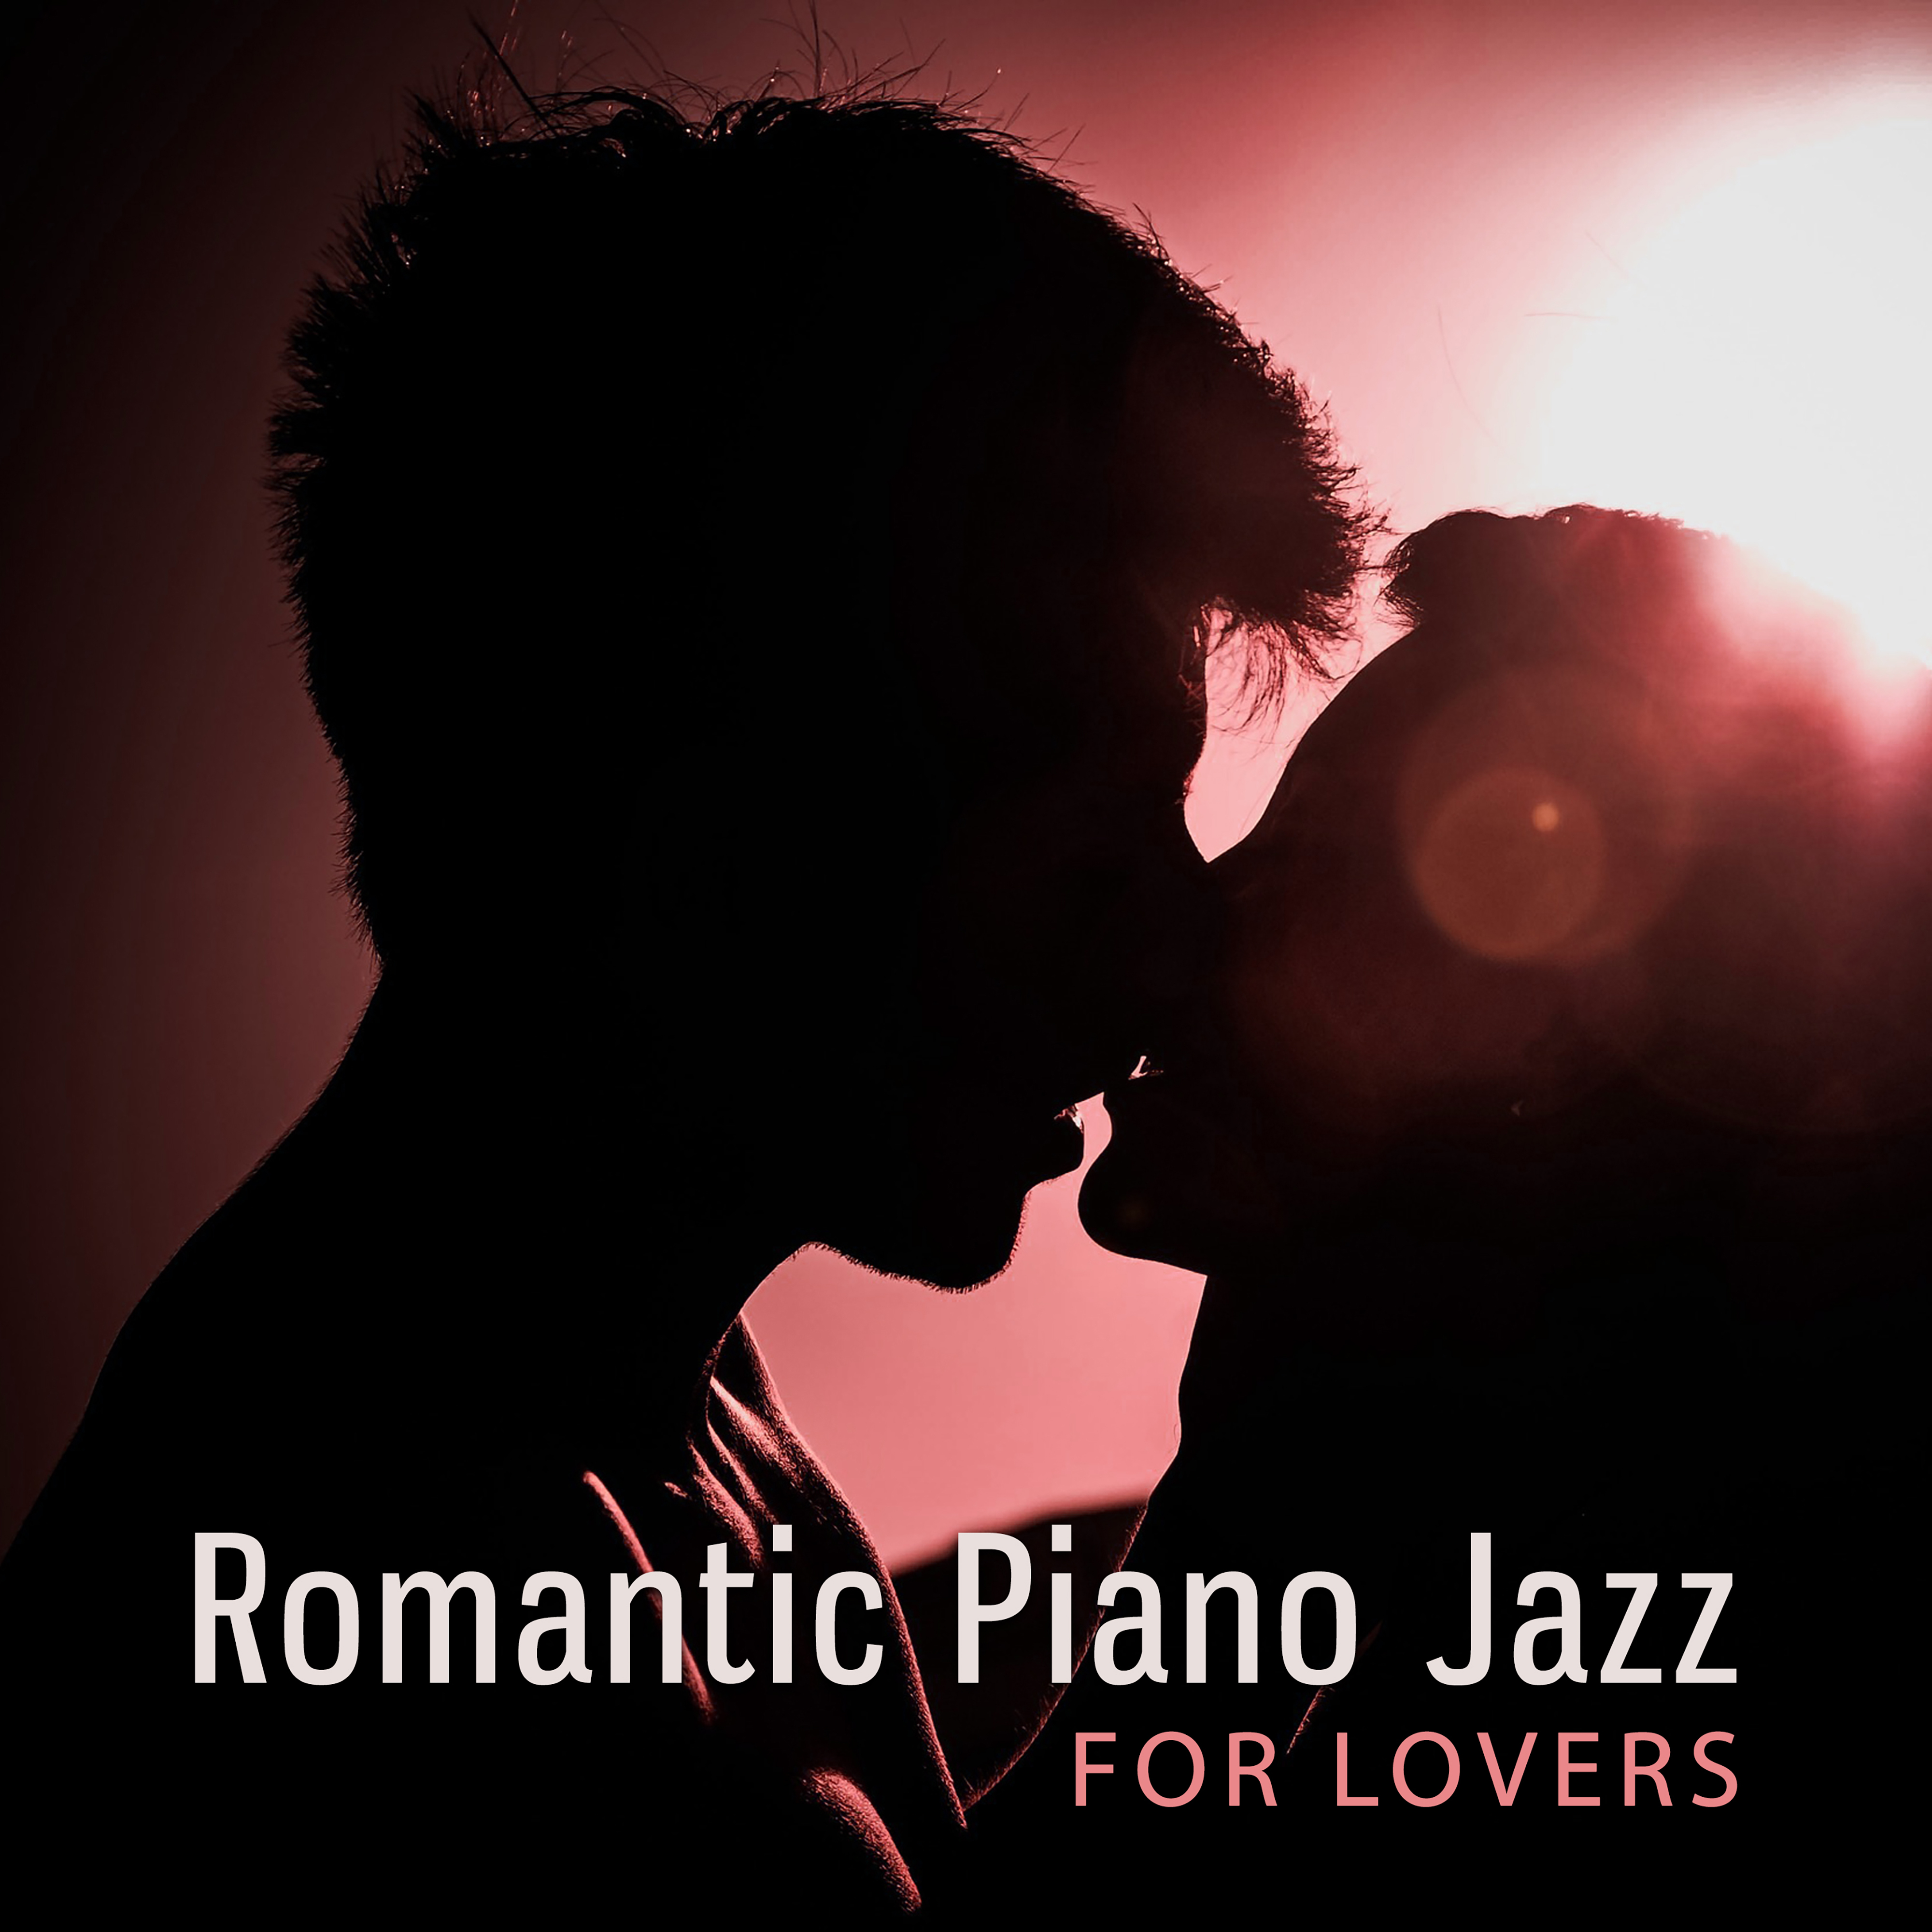 Romantic Piano Jazz for Lovers  Smooth Jazz Music, Sounds to Relax, Erotic Night, Midnight Jazz